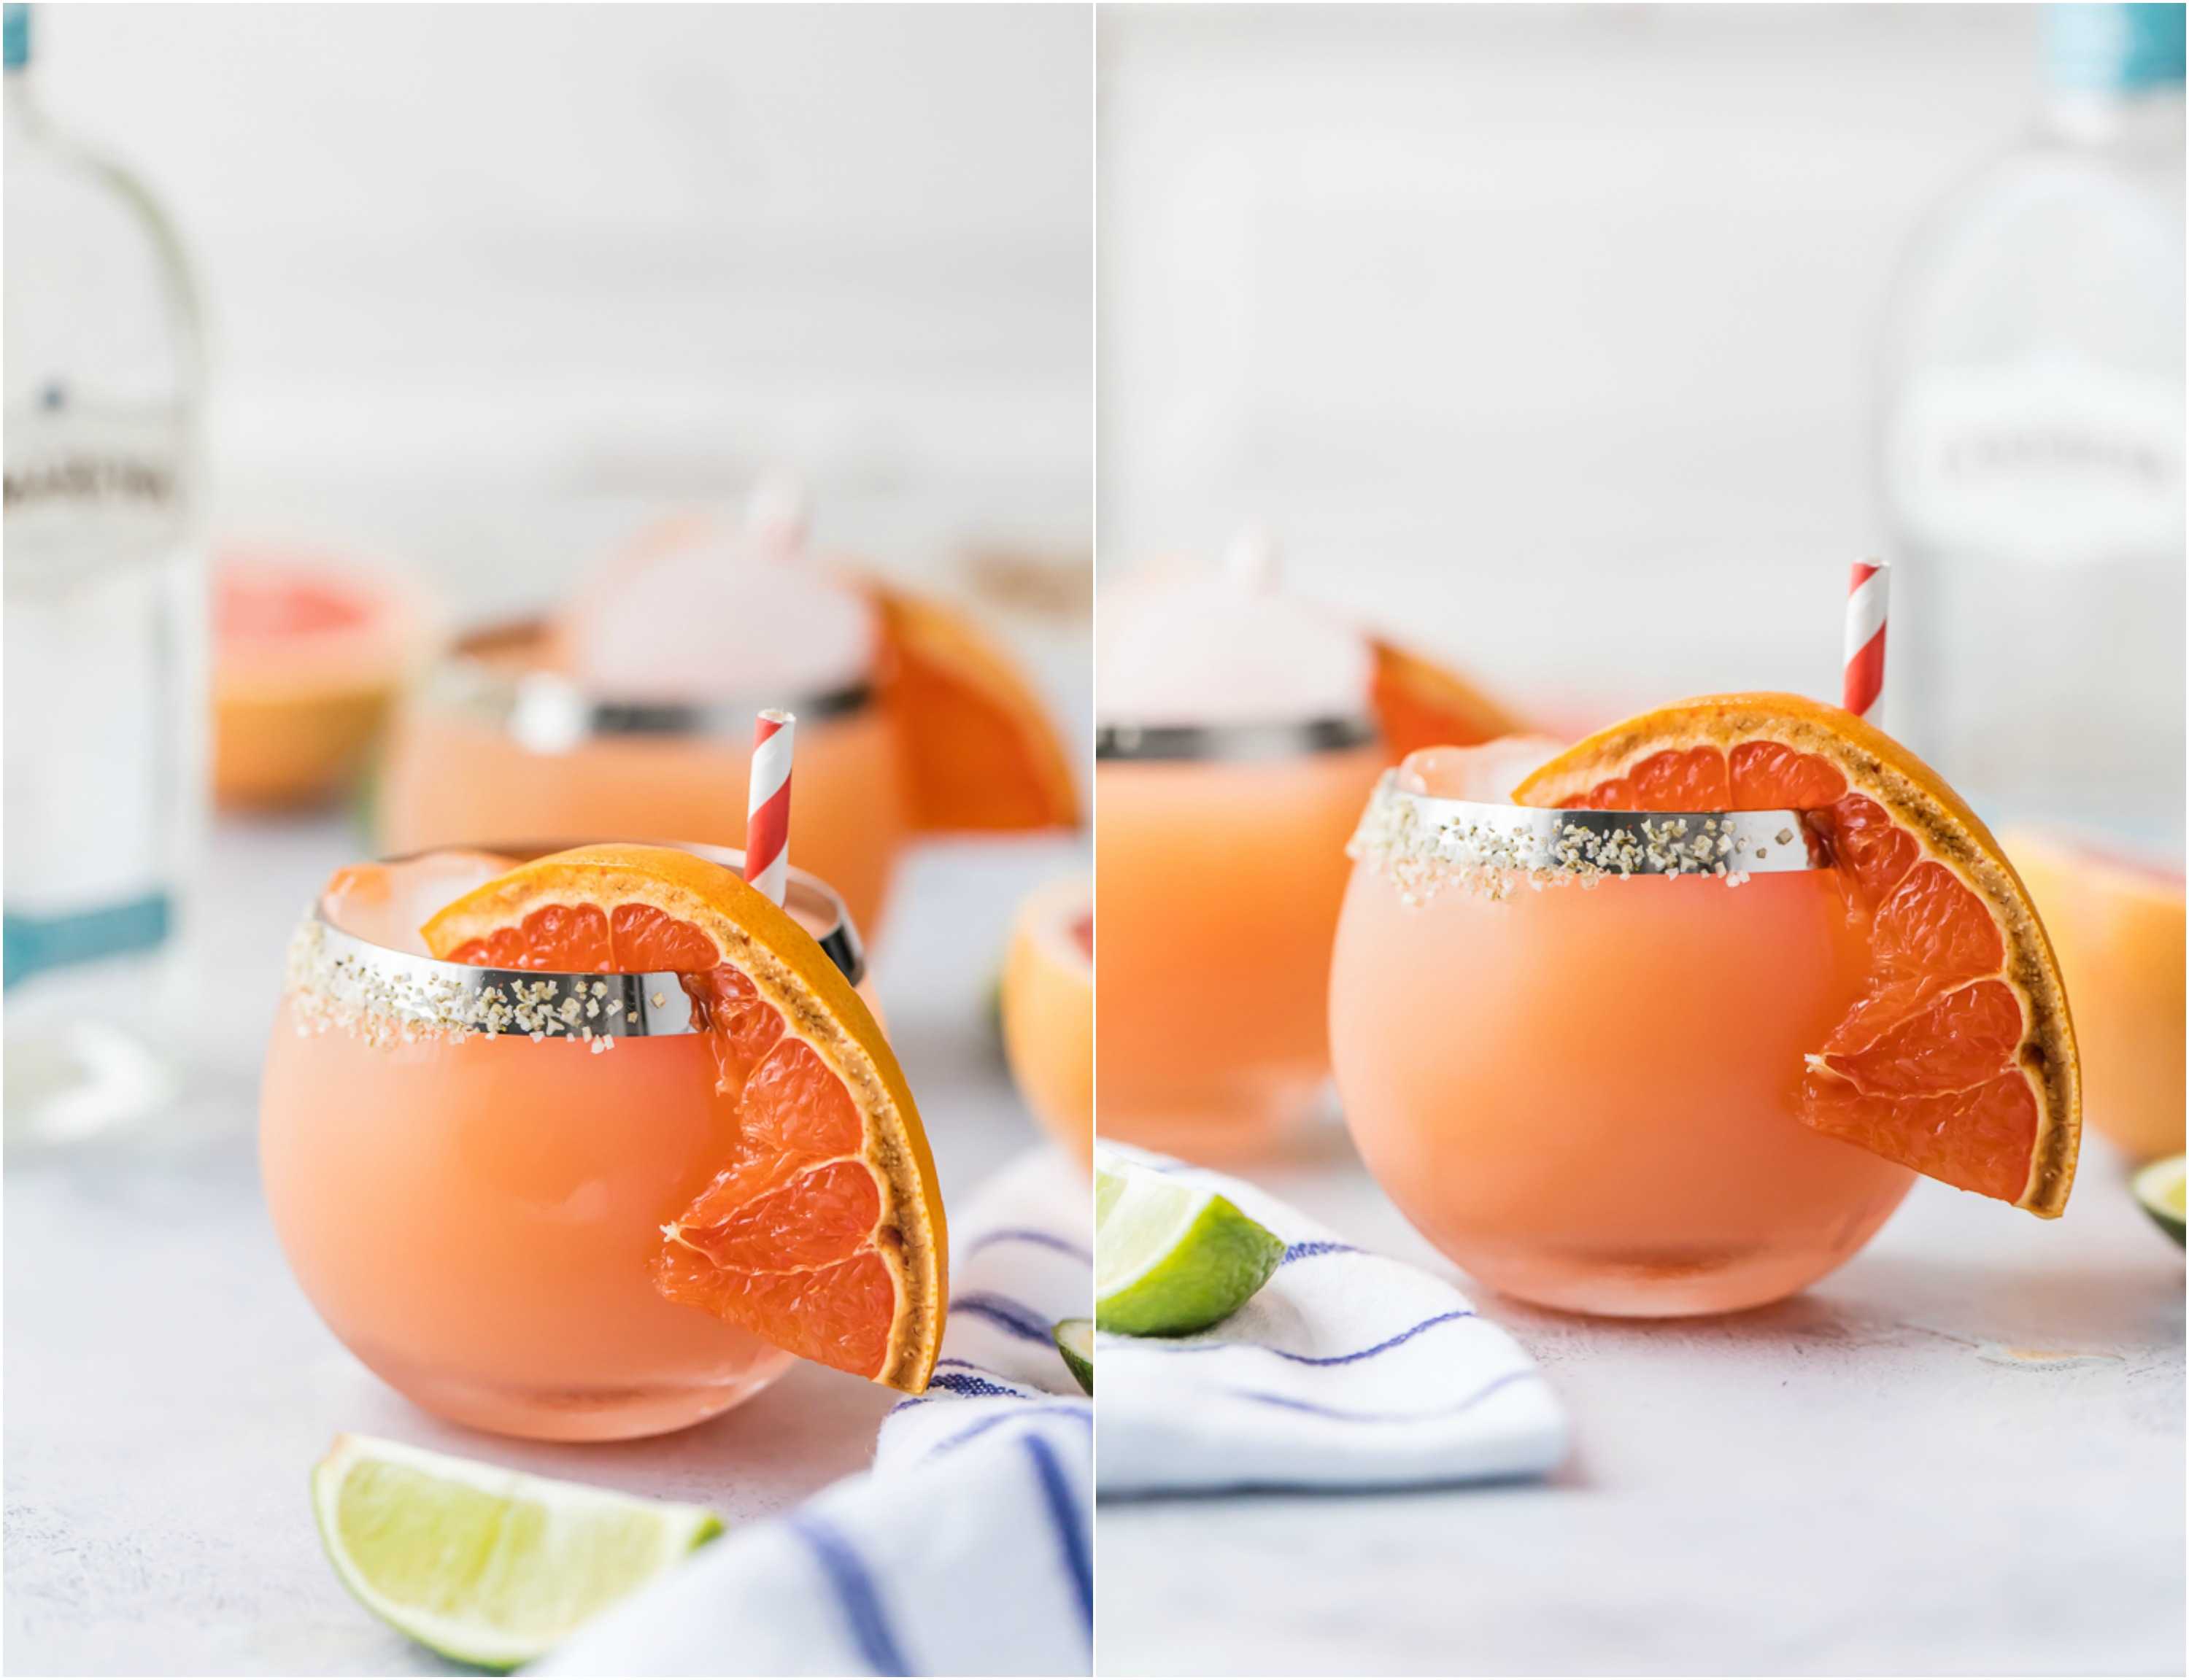 Cheers to Cinco de Mayo with an easy BROILED GRAPEFRUIT MARGARITA! The perfect combination of flavors for a great tangy sweet refreshing margarita perfect for any Summer day!